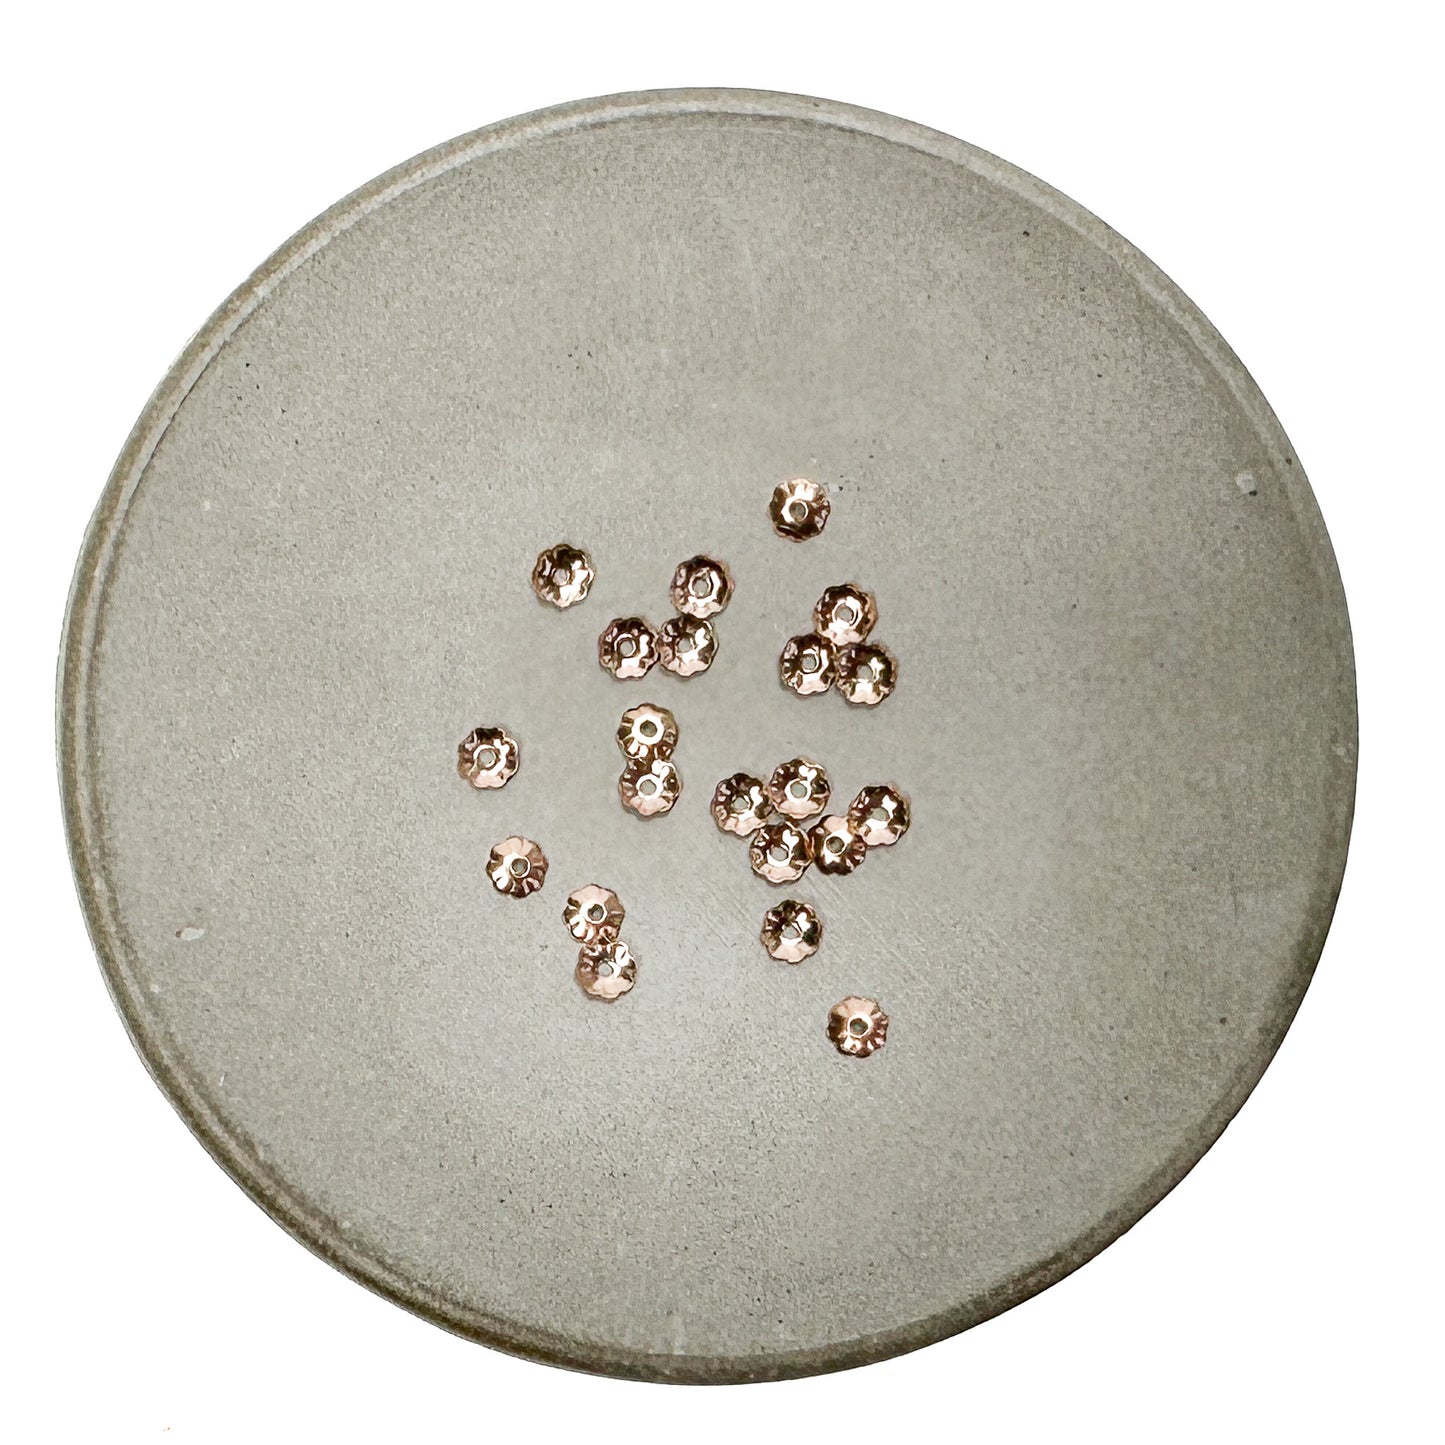 Bead Cap 4mm Fluted (Rose Gold Filled) - 10 pcs.-The Bead Gallery Honolulu